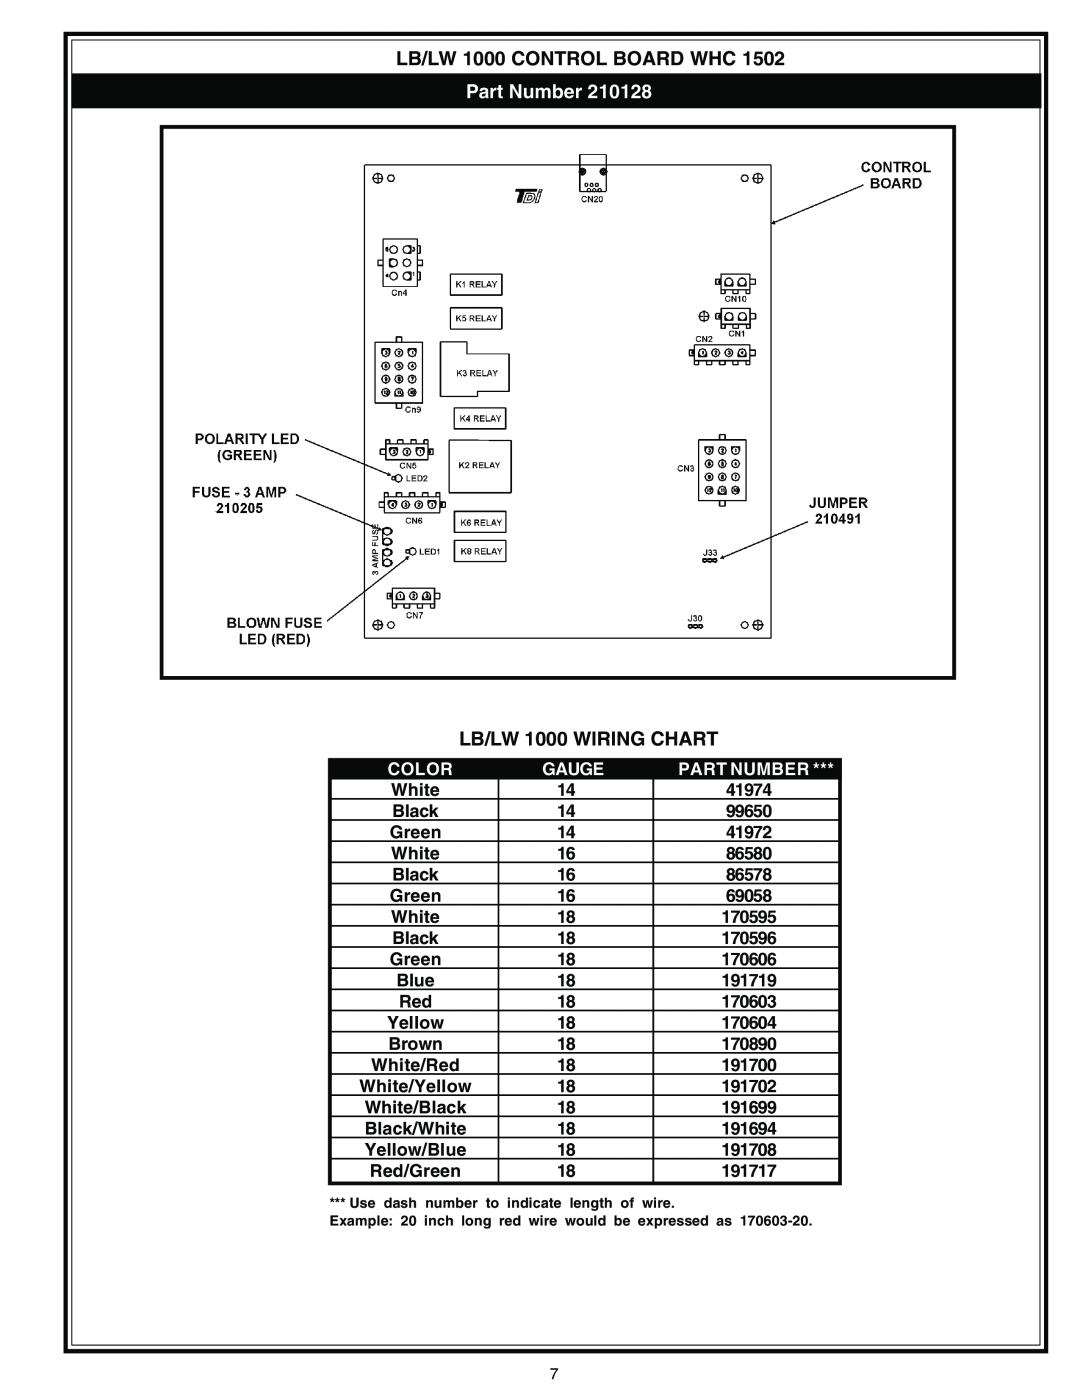 A.O. Smith 980 Series, 981 Series manual Part Number, LB/LW 1000 CONTROL BOARD WHC, LB/LW 1000 WIRING CHART, Color, Gauge 